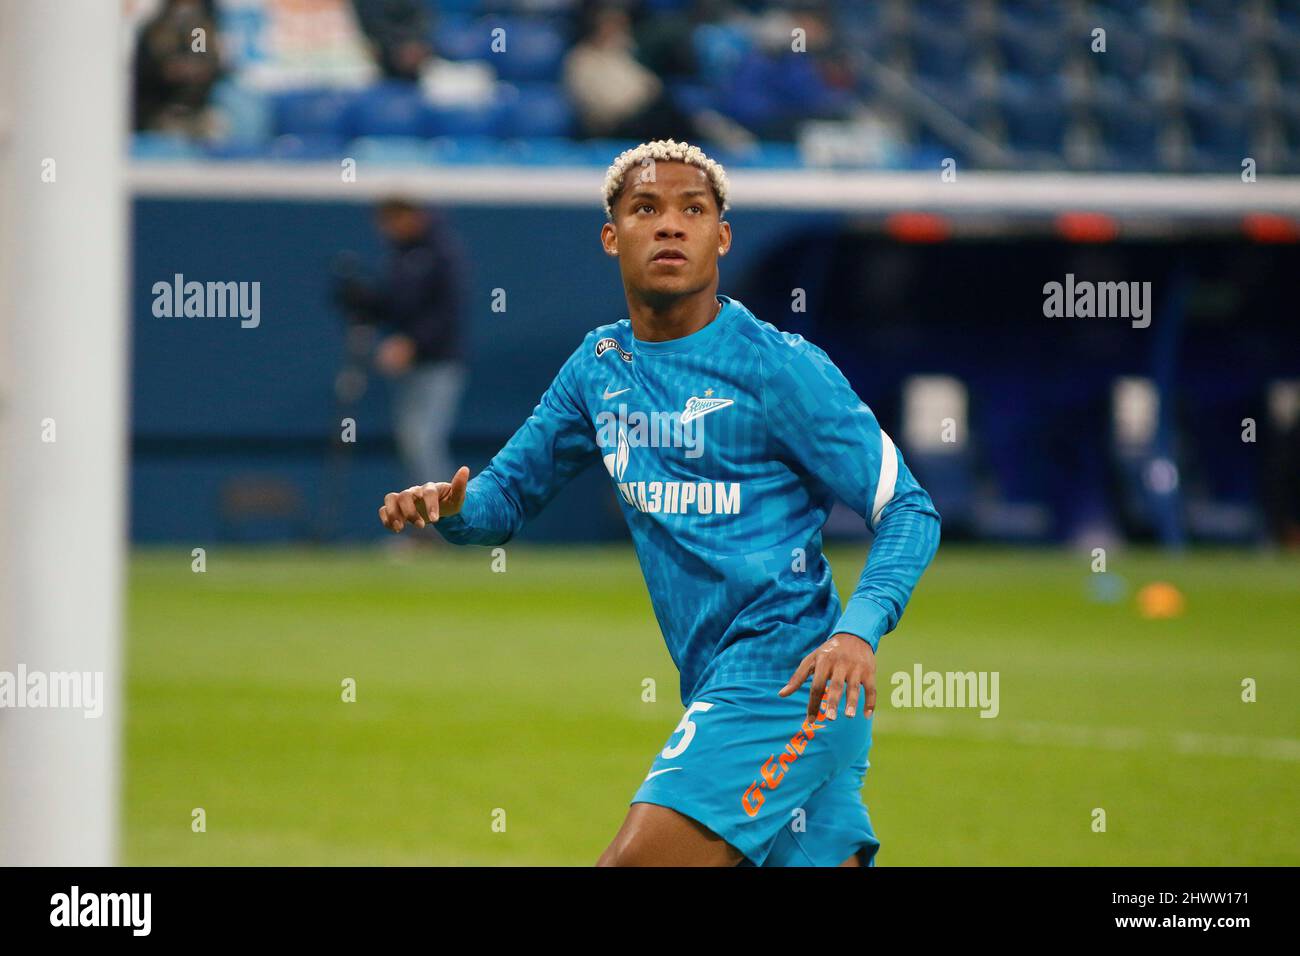 Saint Petersburg, Russia. 07th Mar, 2022. Wilmar Henrique Barrios Teran, commonly known as Wilmar Barrios (No.5) of Zenit compete during the Russian Premier League football match between Zenit Saint Petersburg and Ufa at Gazprom Arena. Final score; Zenit 2:0 Ufa. (Photo by Maksim Konstantinov/SOPA Image/Sipa USA) Credit: Sipa USA/Alamy Live News Stock Photo